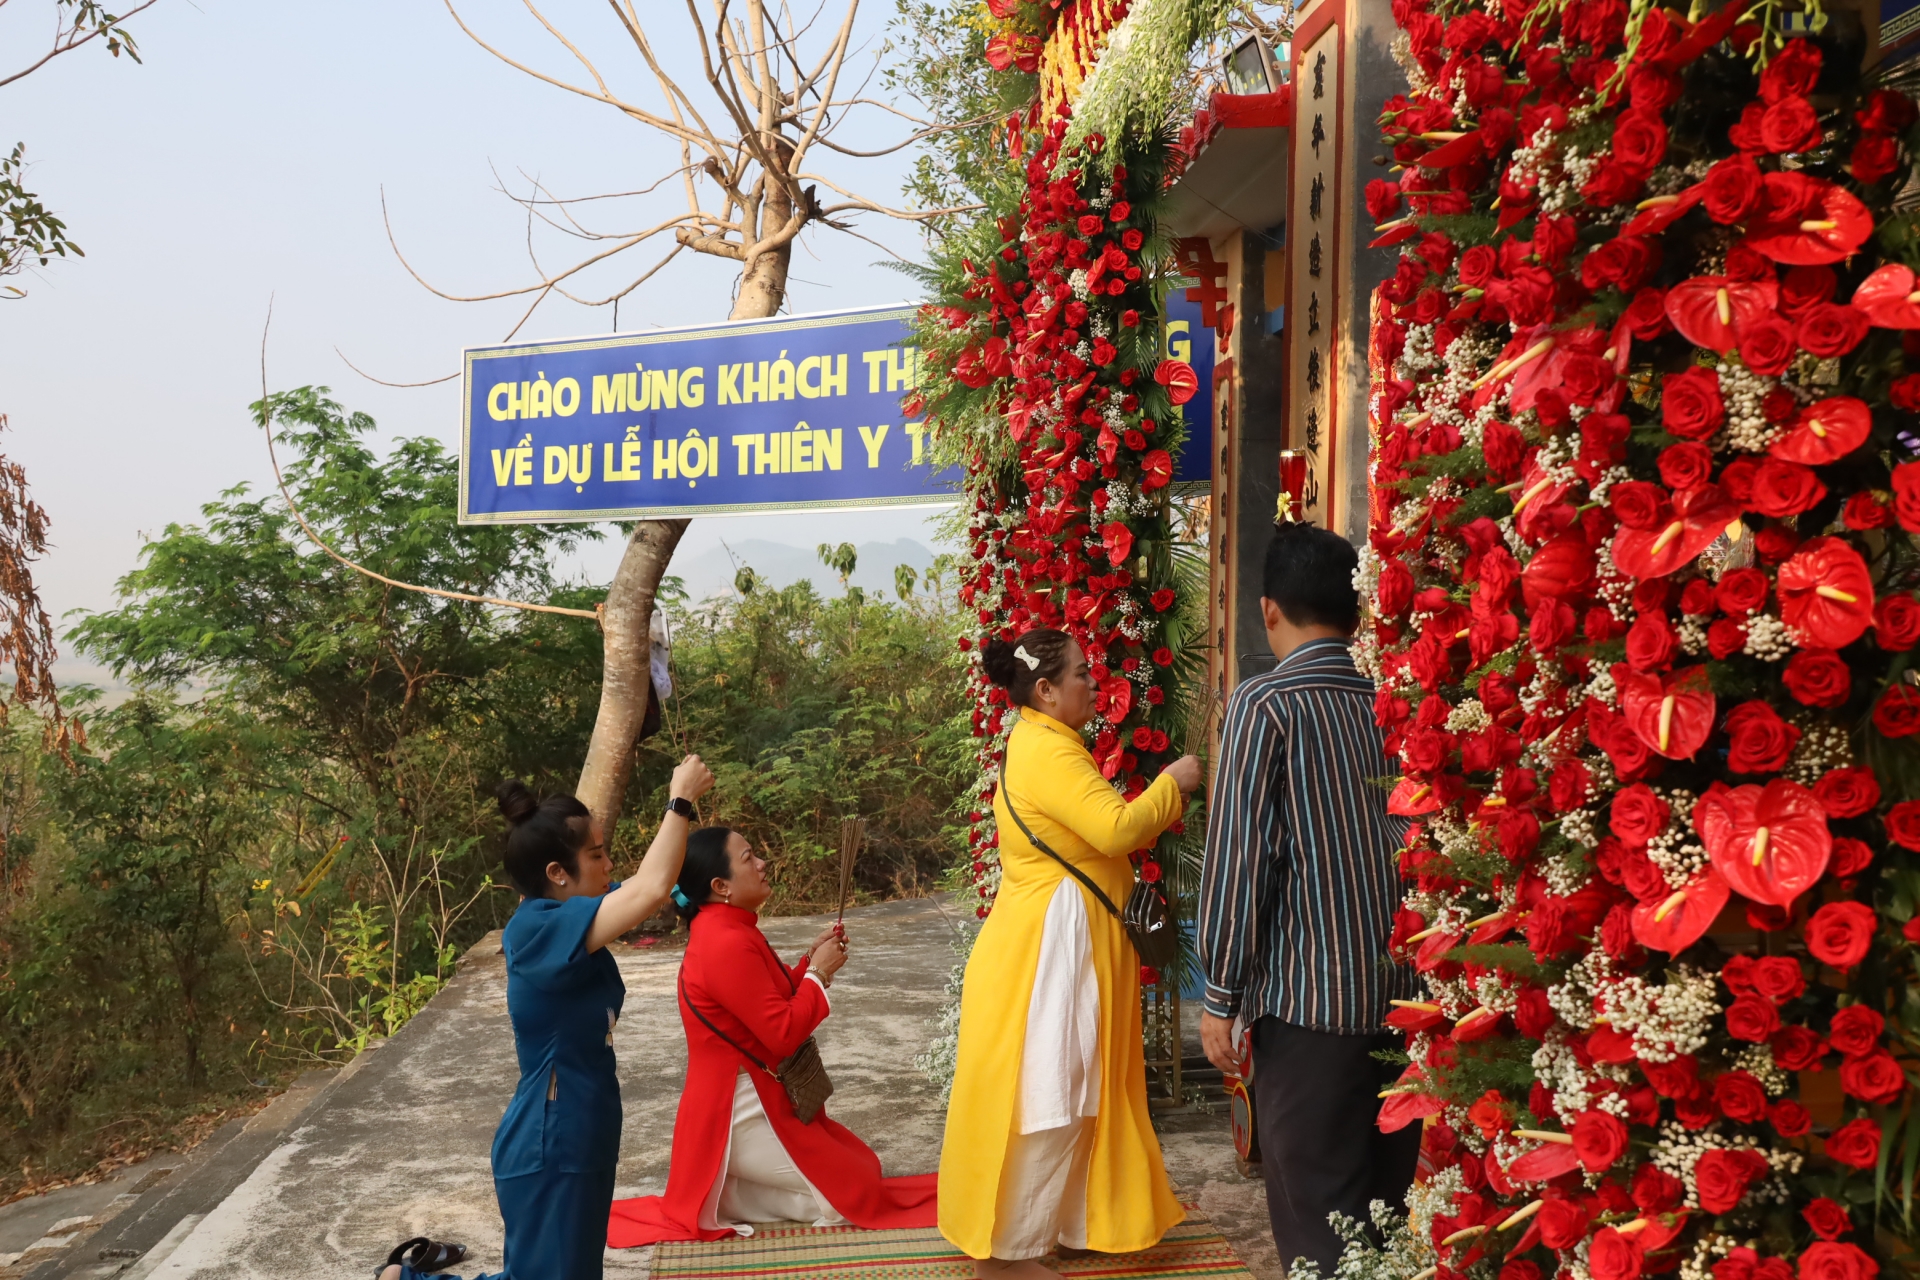 People expressing their gratitude to the Holy Mother
